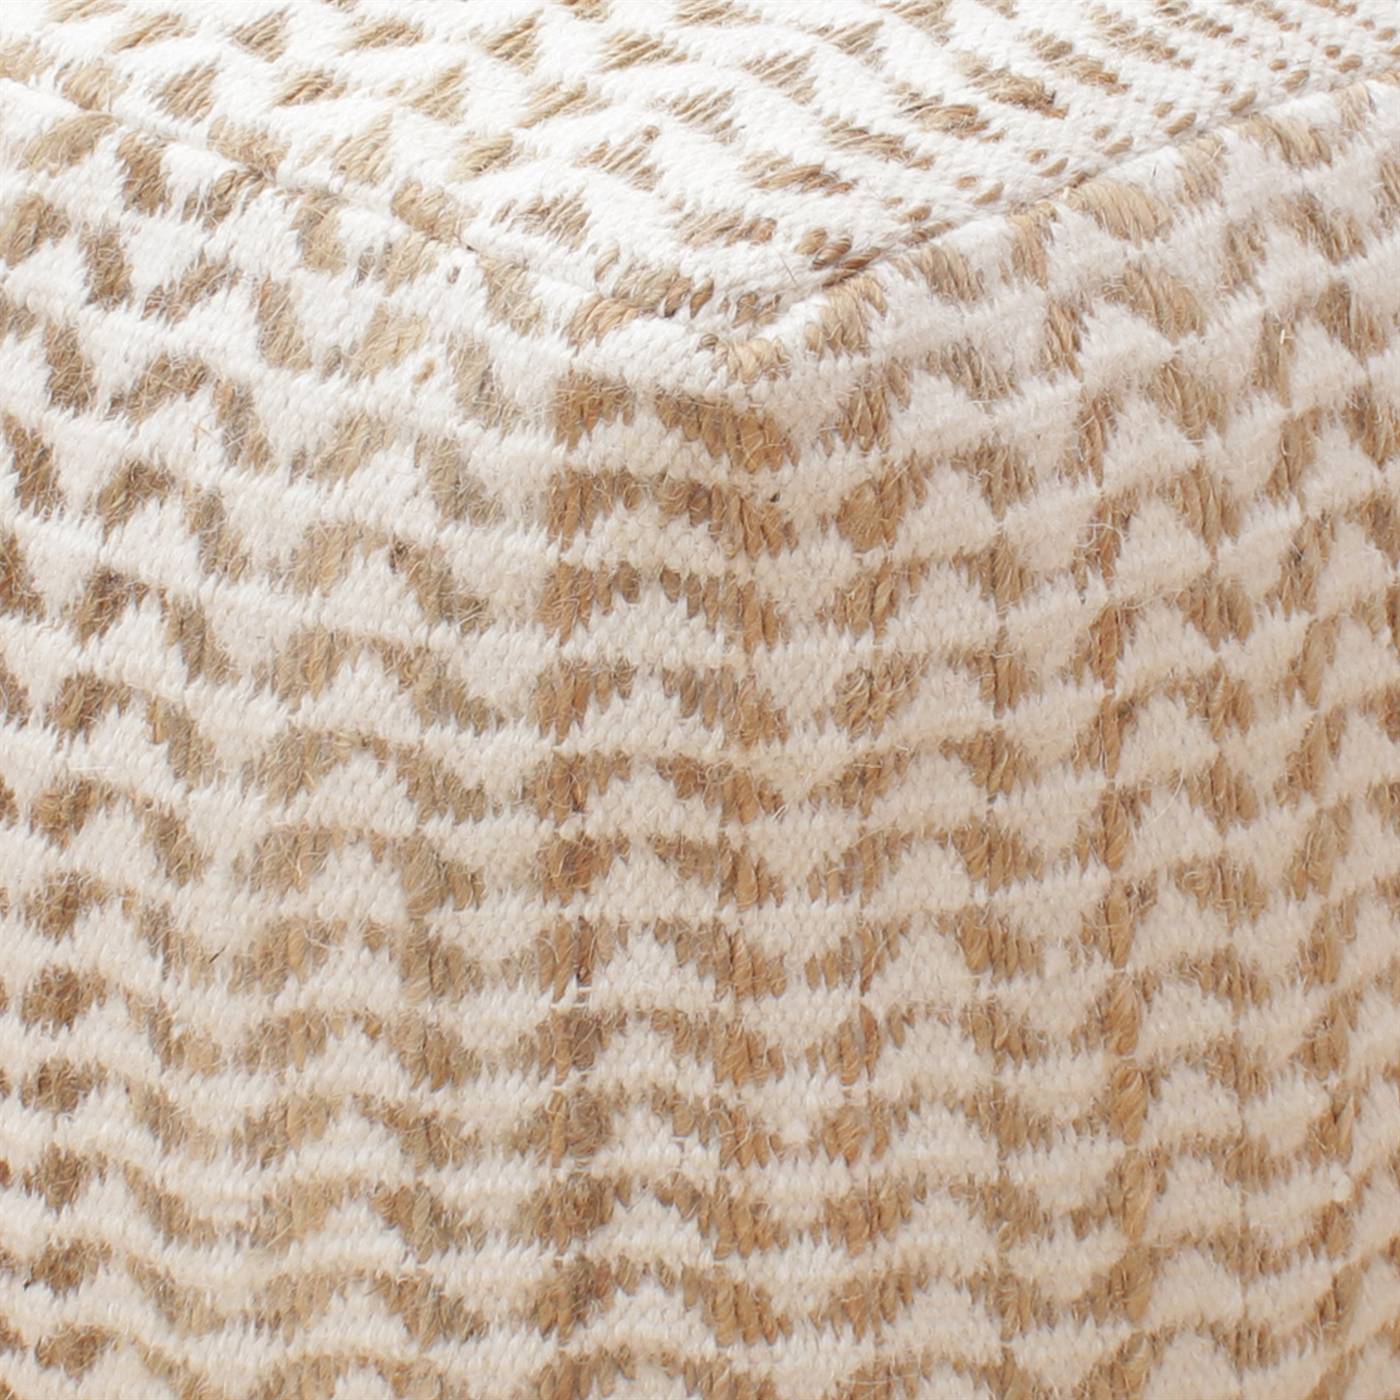 Basento Pouf, 40x40x40 cm, Natural, Natural White, Jute, Wool, Hand Woven, Pitloom, Flat Weave